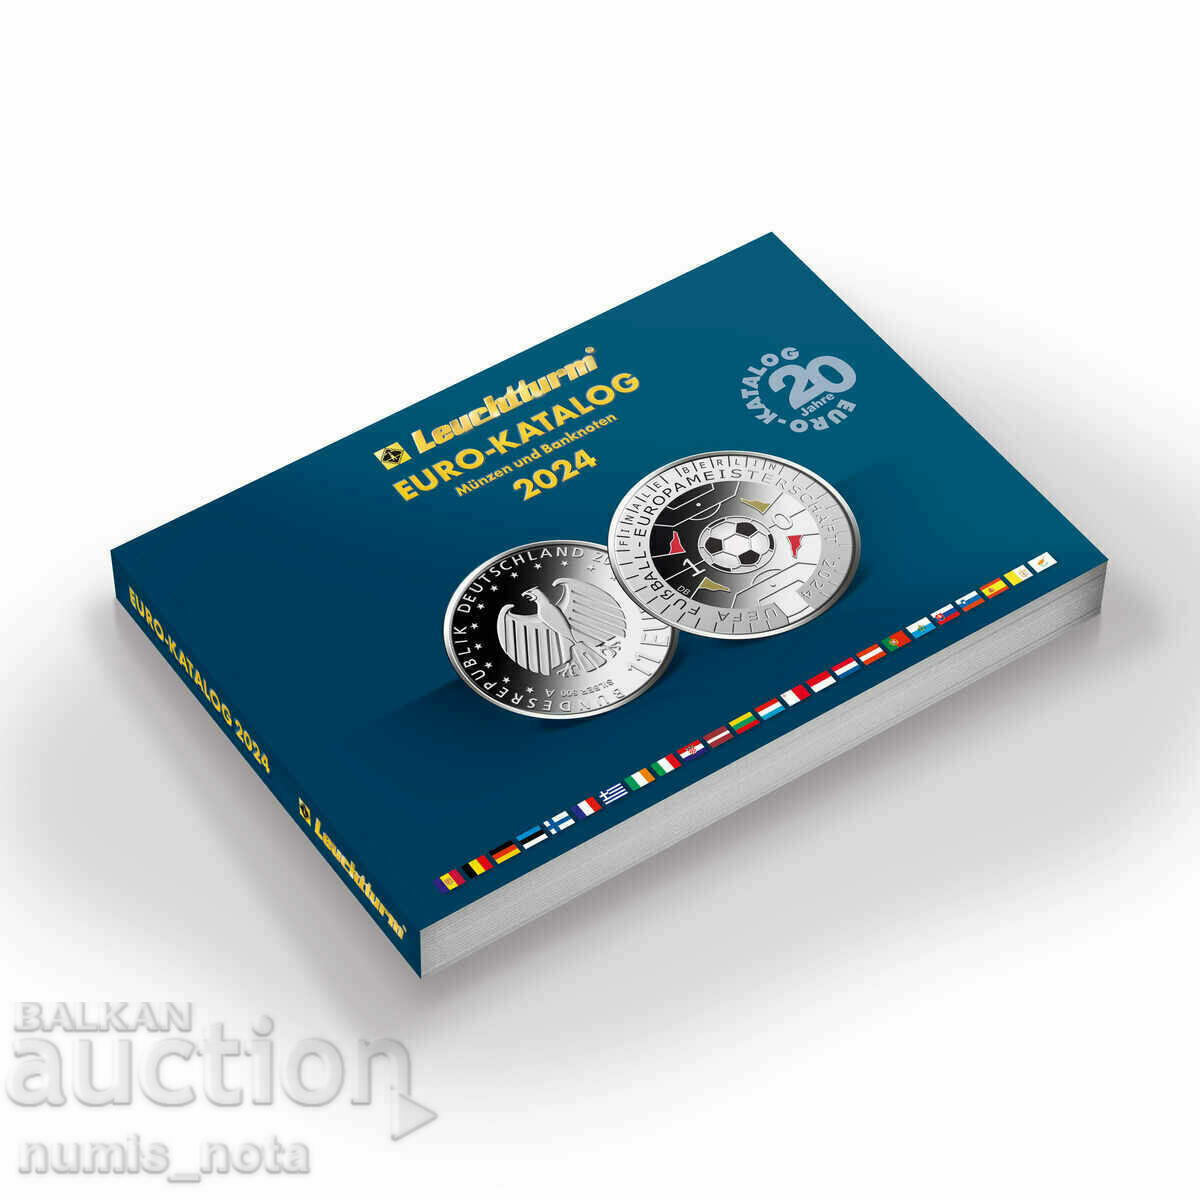 Catalog of All EURO coins and banknotes - latest edition